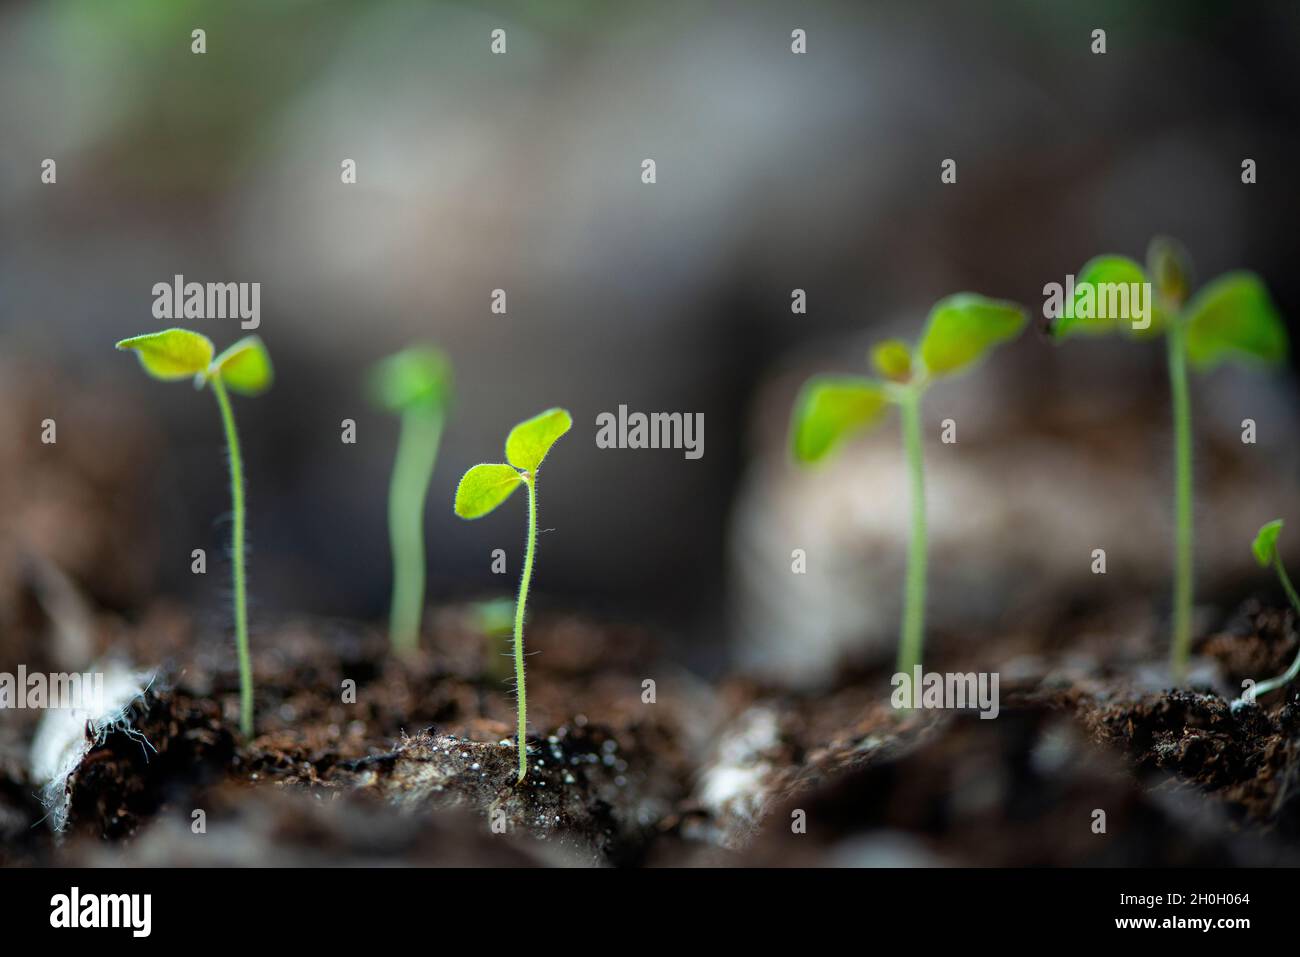 A row of seedlings. Stock Photo